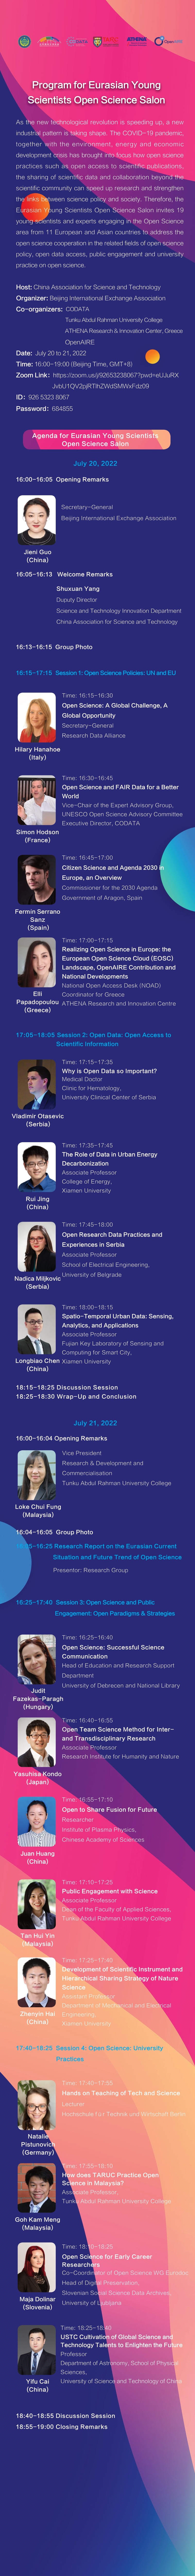 Program for Eurasian Young Scientists Open Science Salon